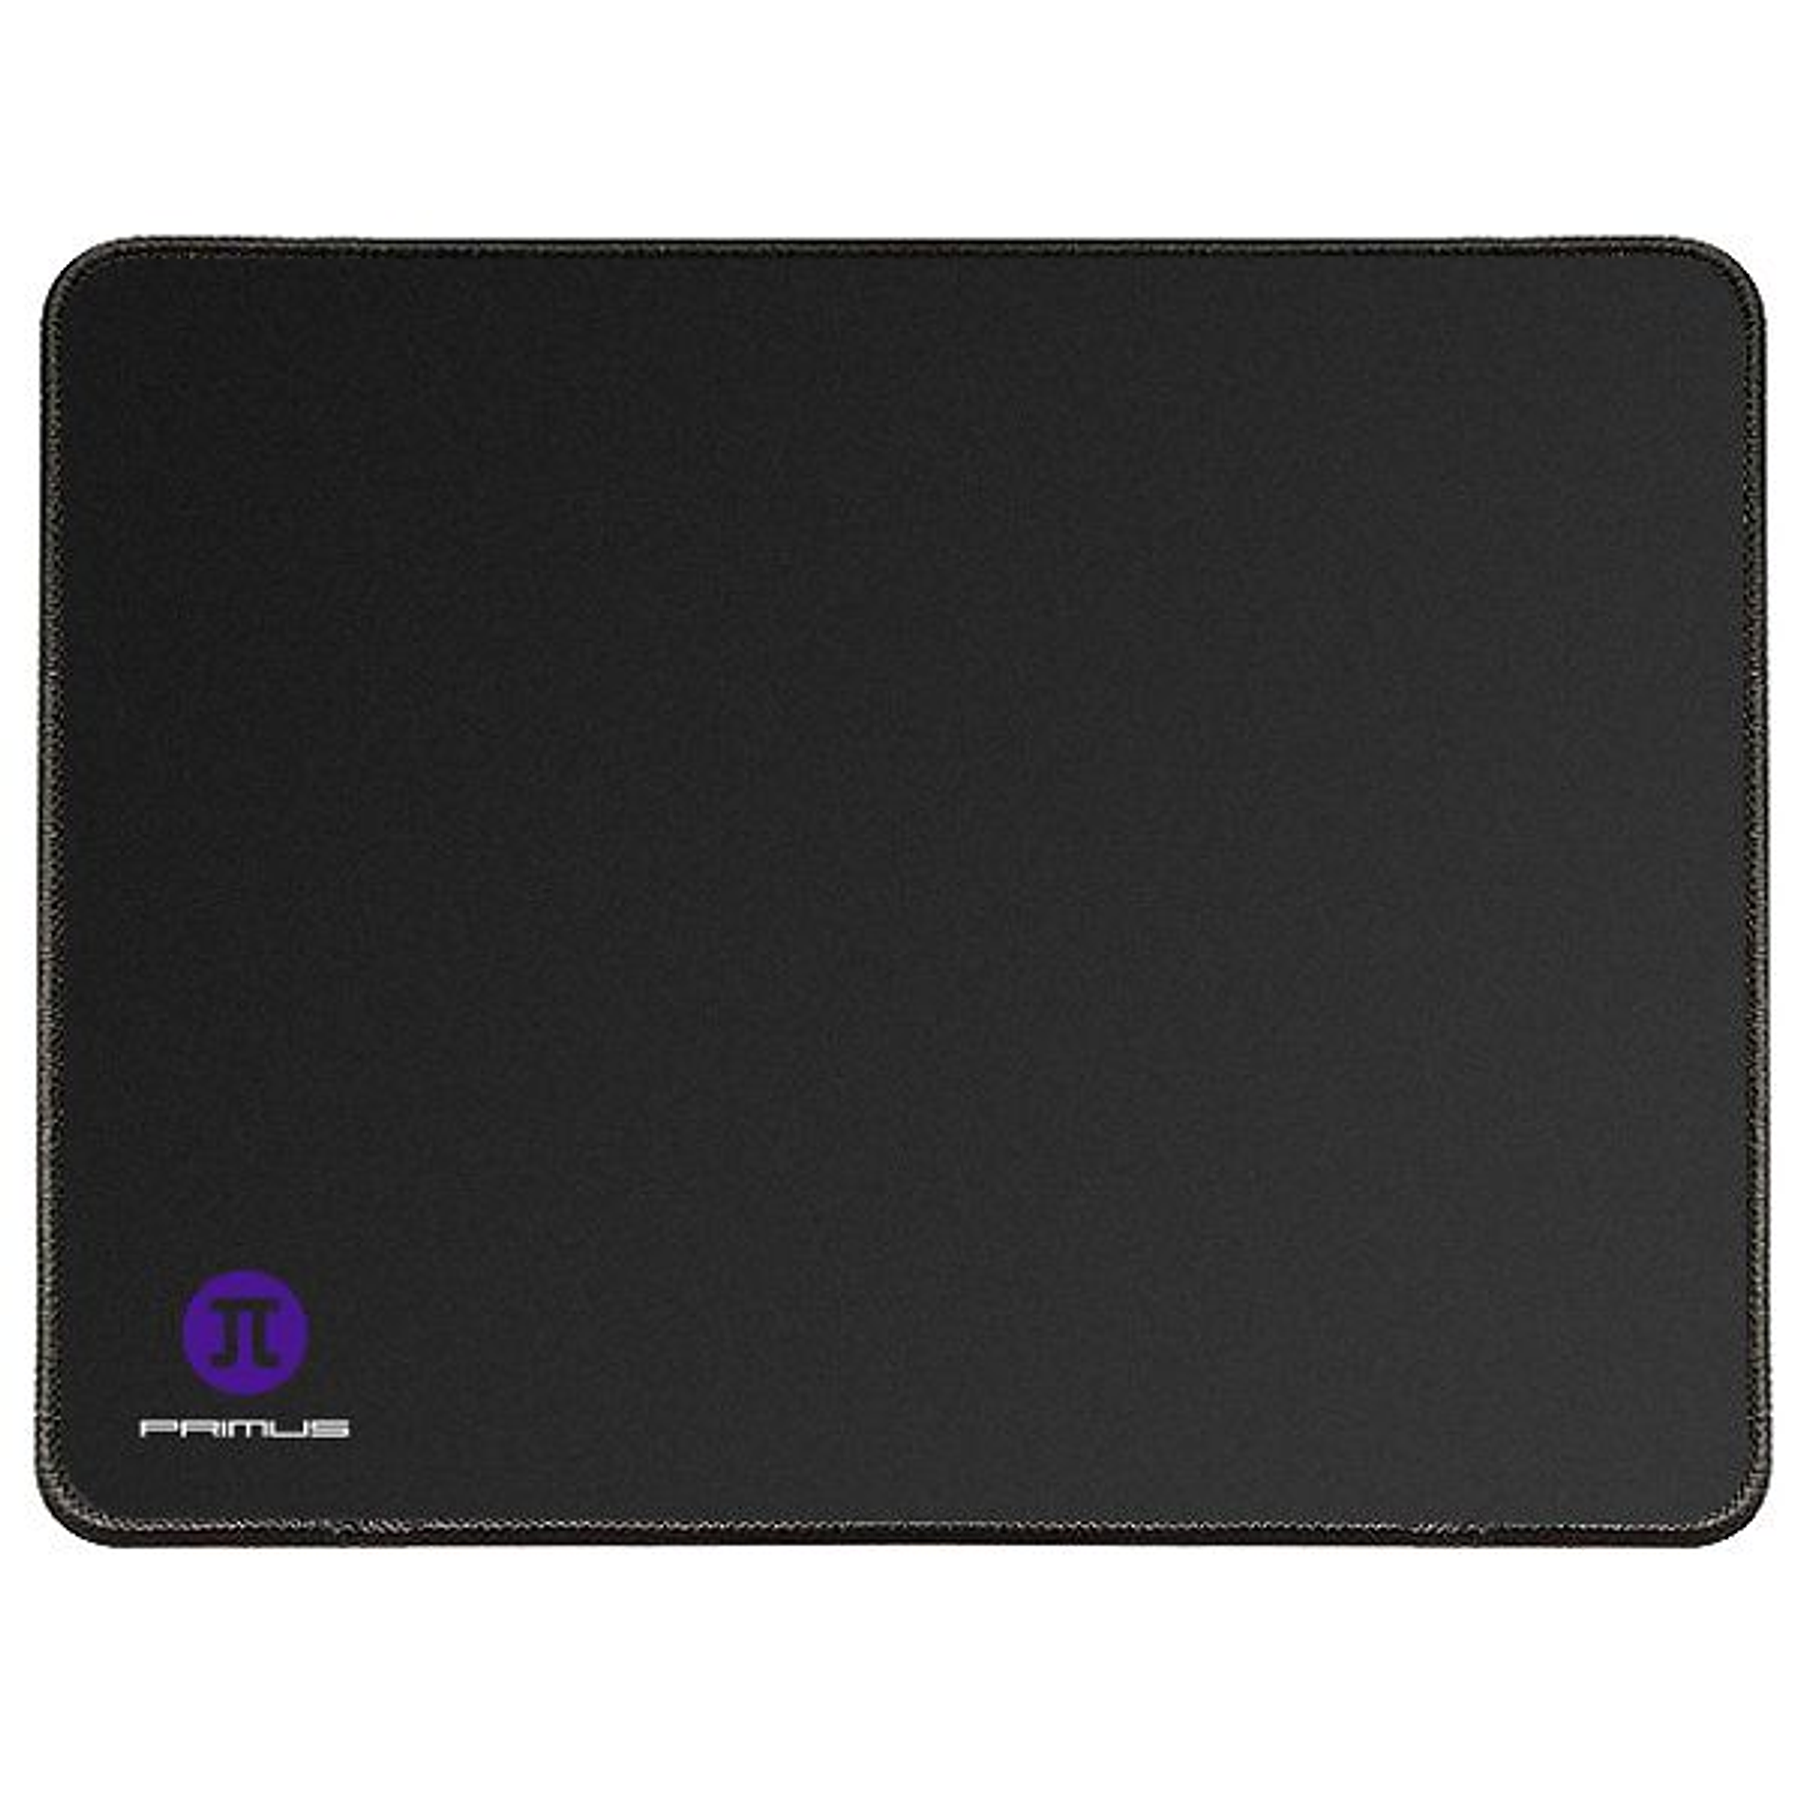 Primus Gaming Mouse Pad Arena XL Black 650x 370 x 4mm